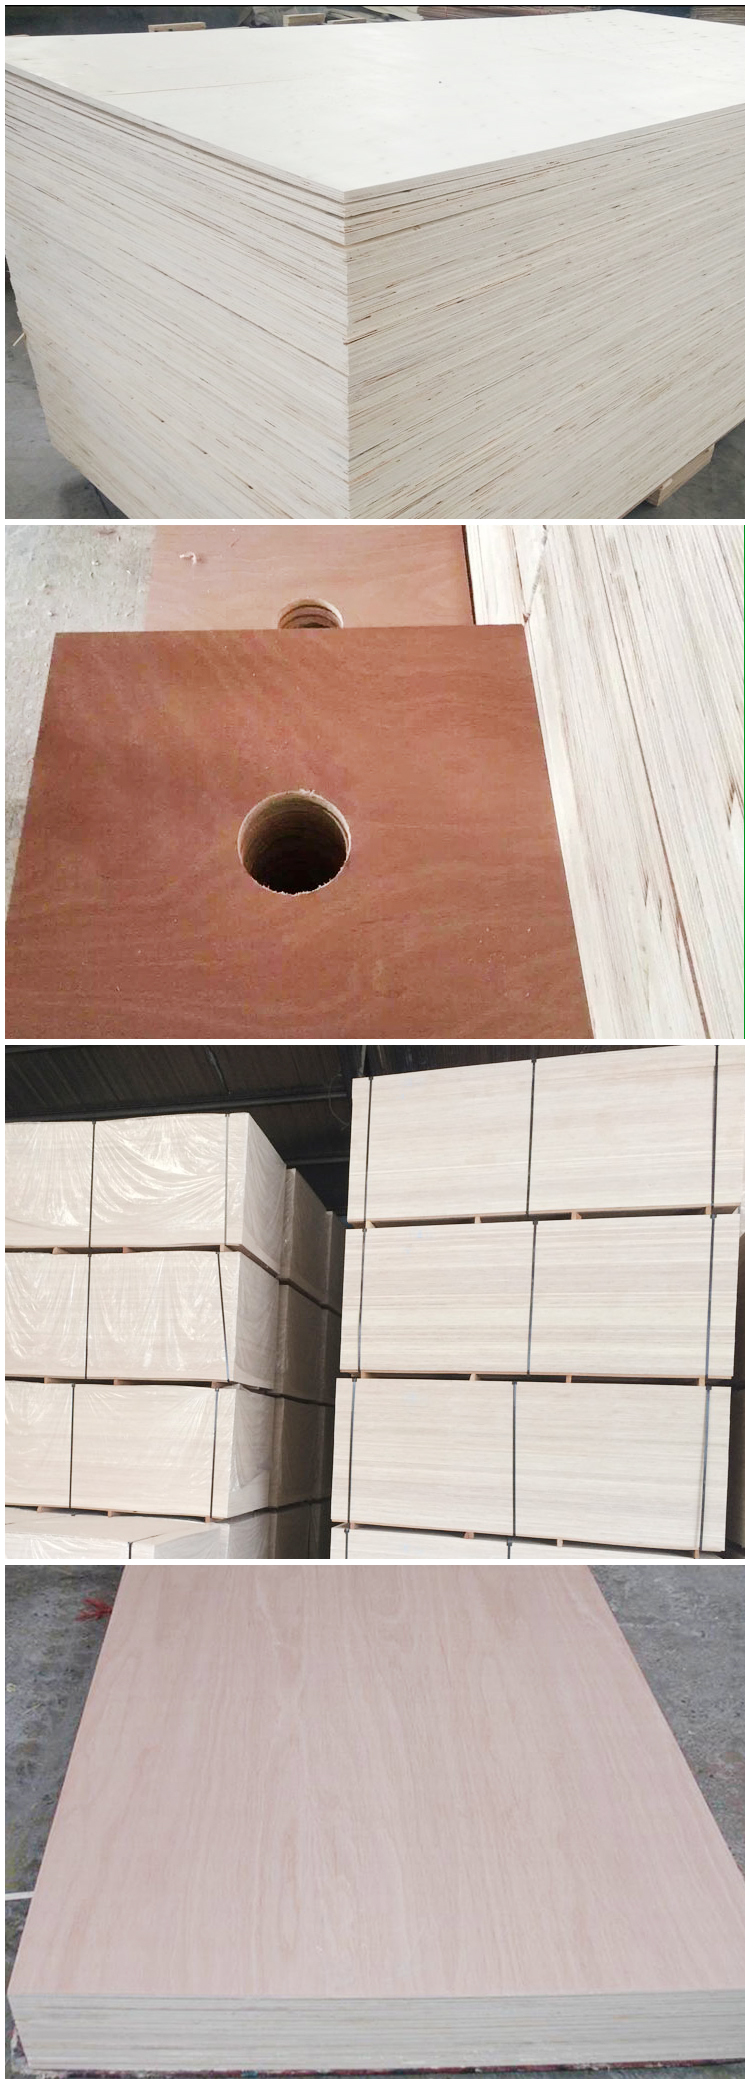 poplar core commercial plywood(图3)